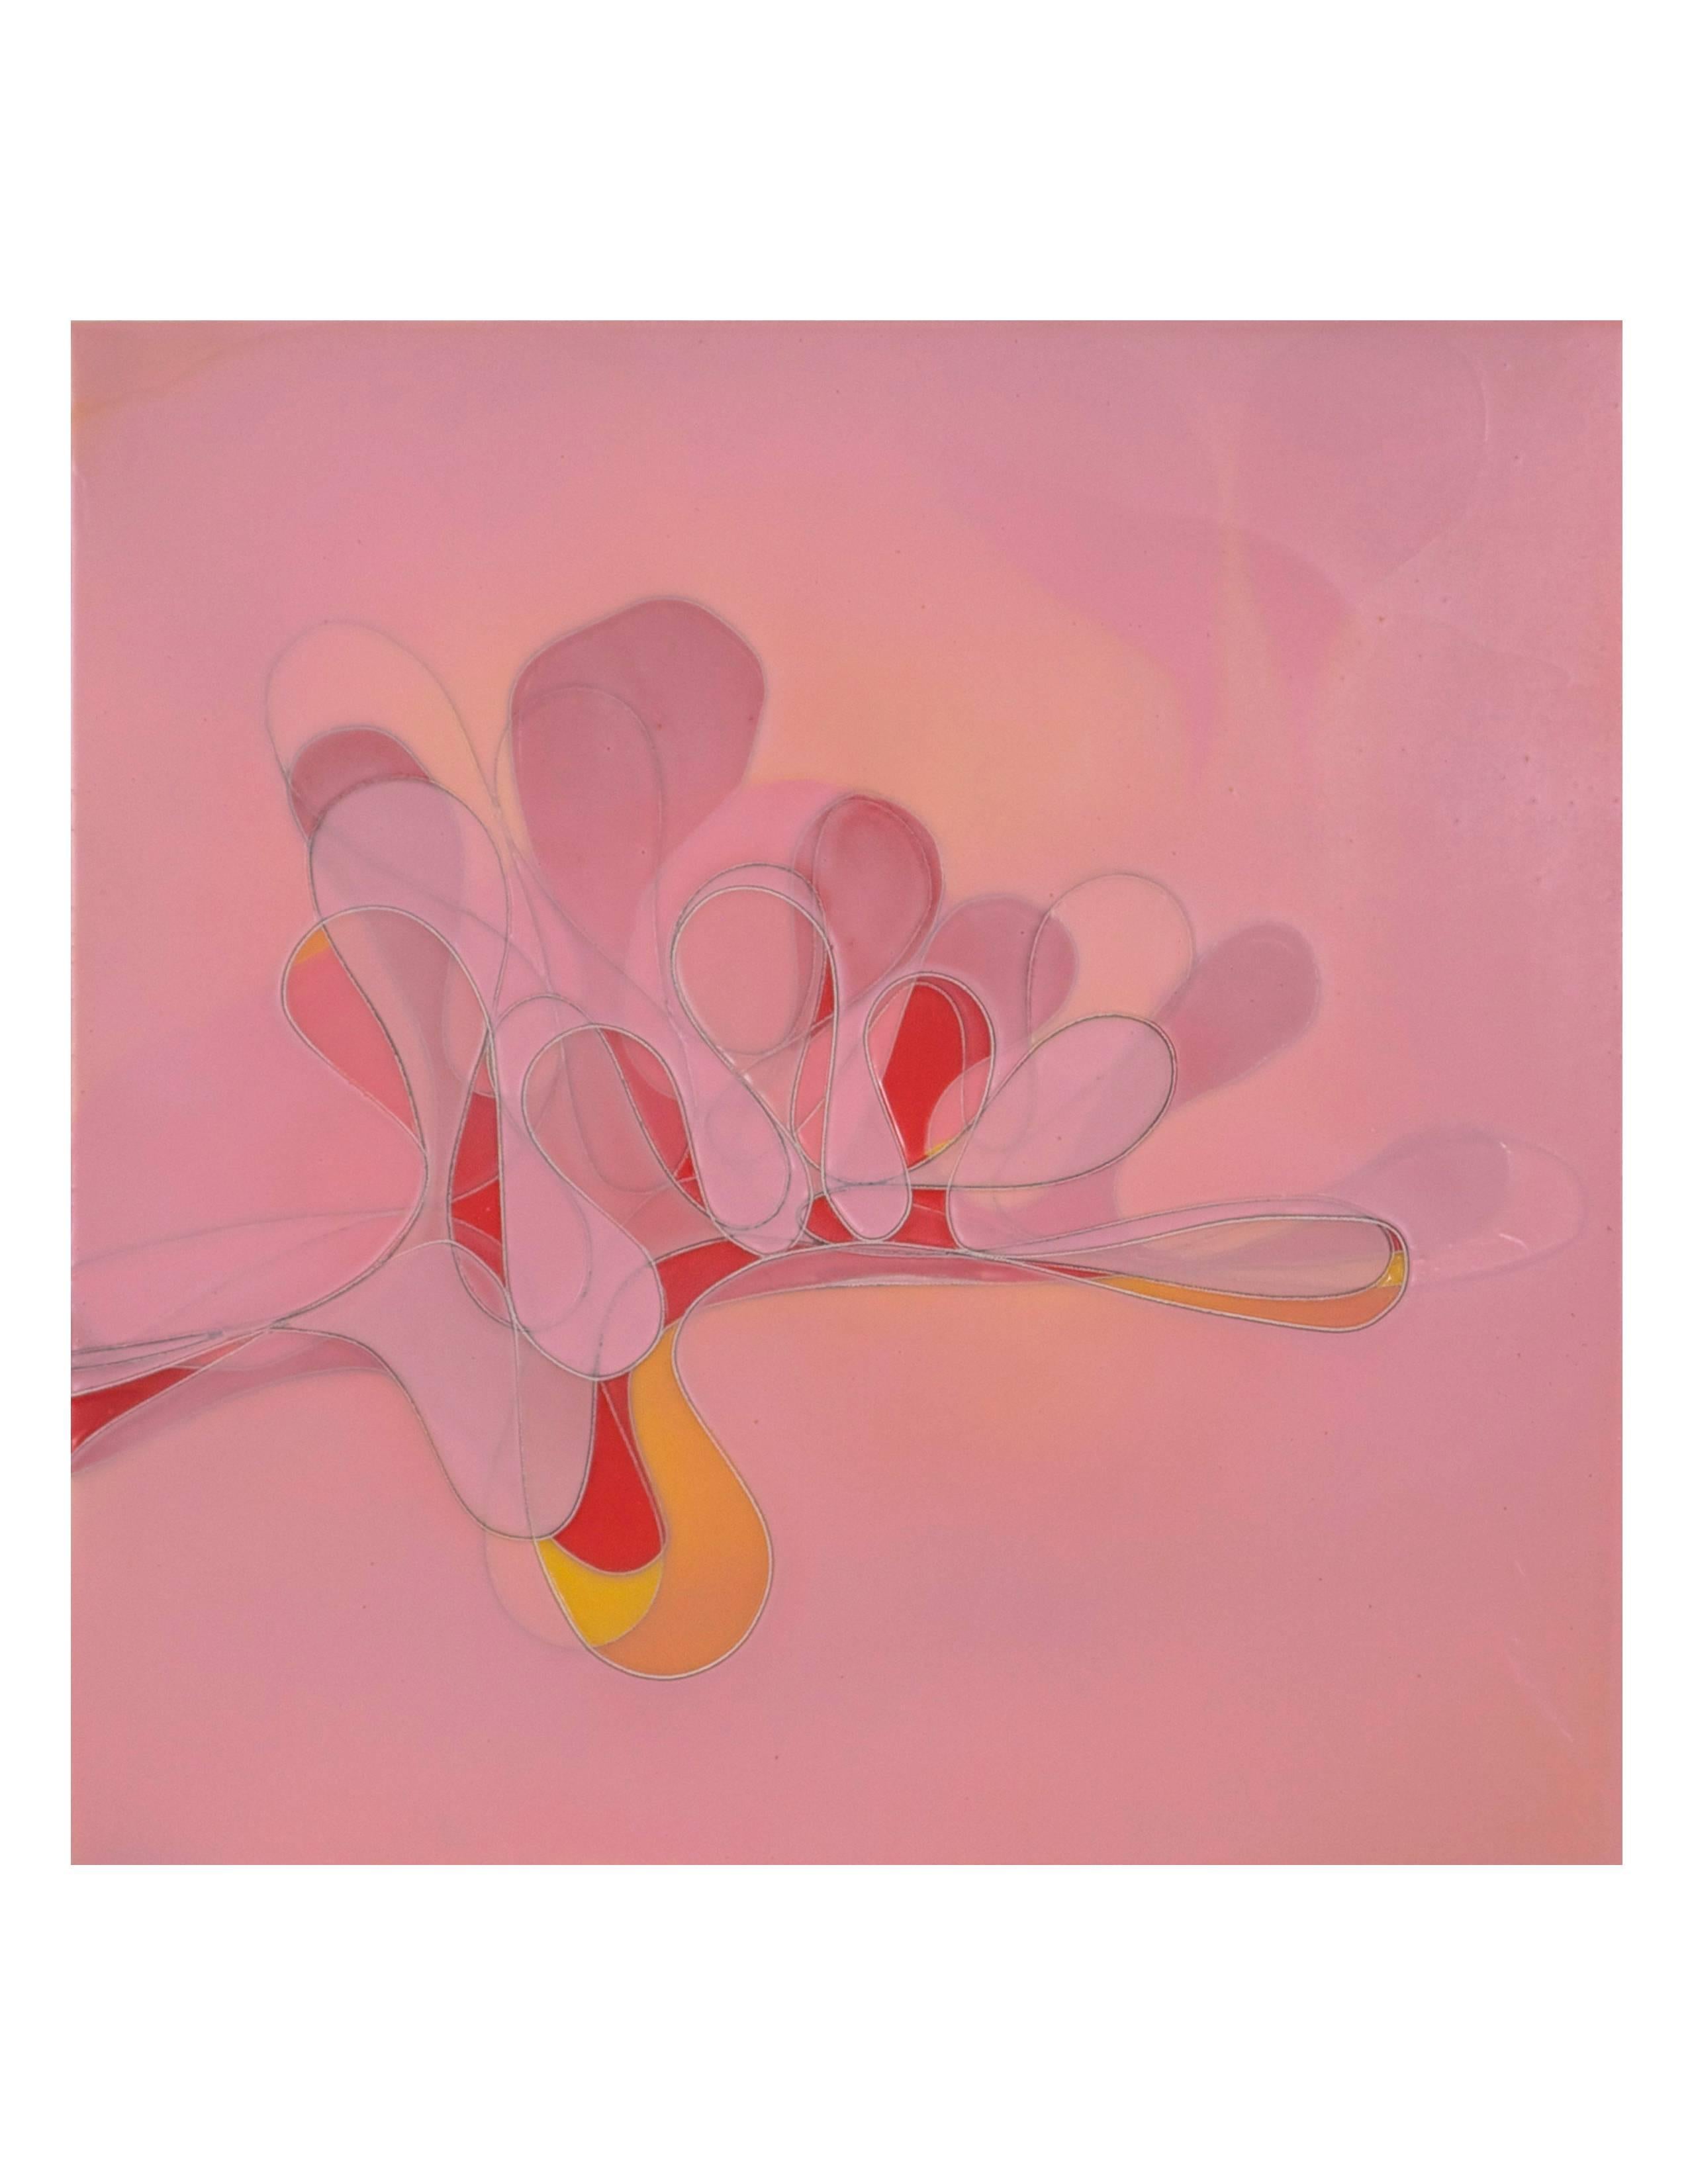 Material: Acrylic & Polyurethane on Canvas
Dimensions: 24" x 24" x 2.75"

Born in Columbus, Ohio in 1968, Ron Johnson received an MFA from Virginia Commonwealth University in 2003. Since then, Johnson has exhibited widely both nationally and